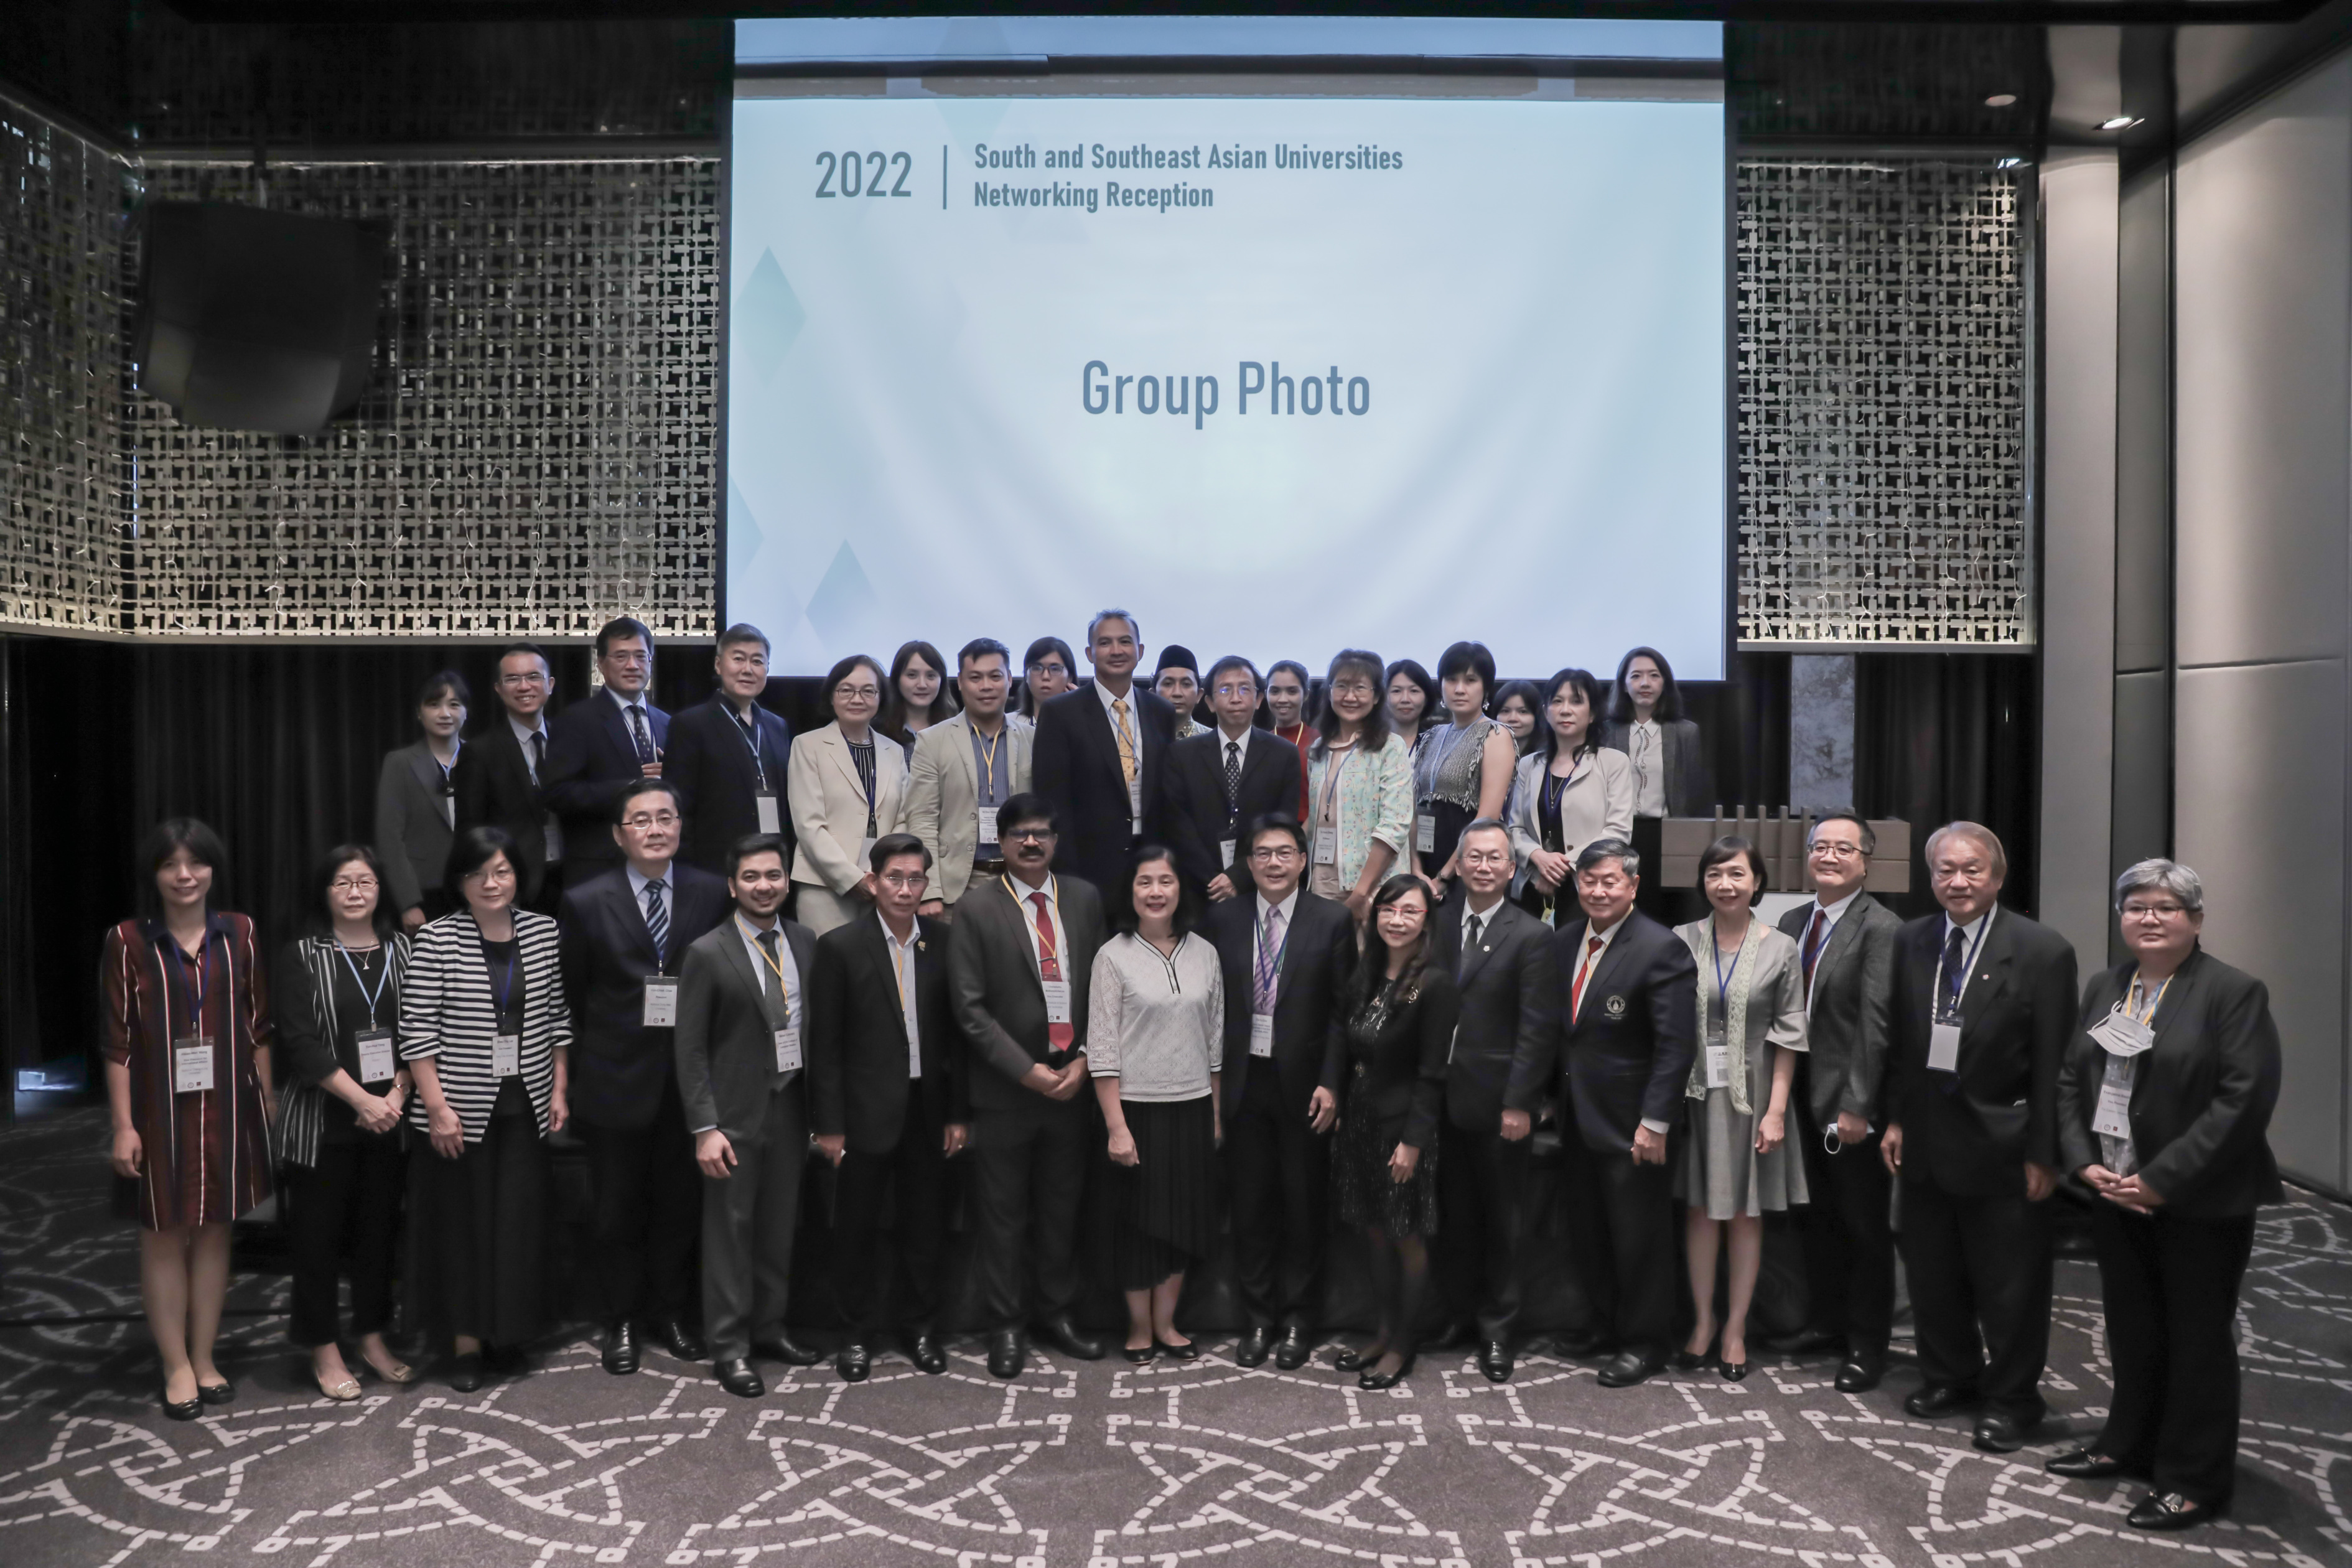 The South and Southeast Asian Universities Networking Reception on Nov. 22 at Regent Taipei was held by NCKU and FICHET